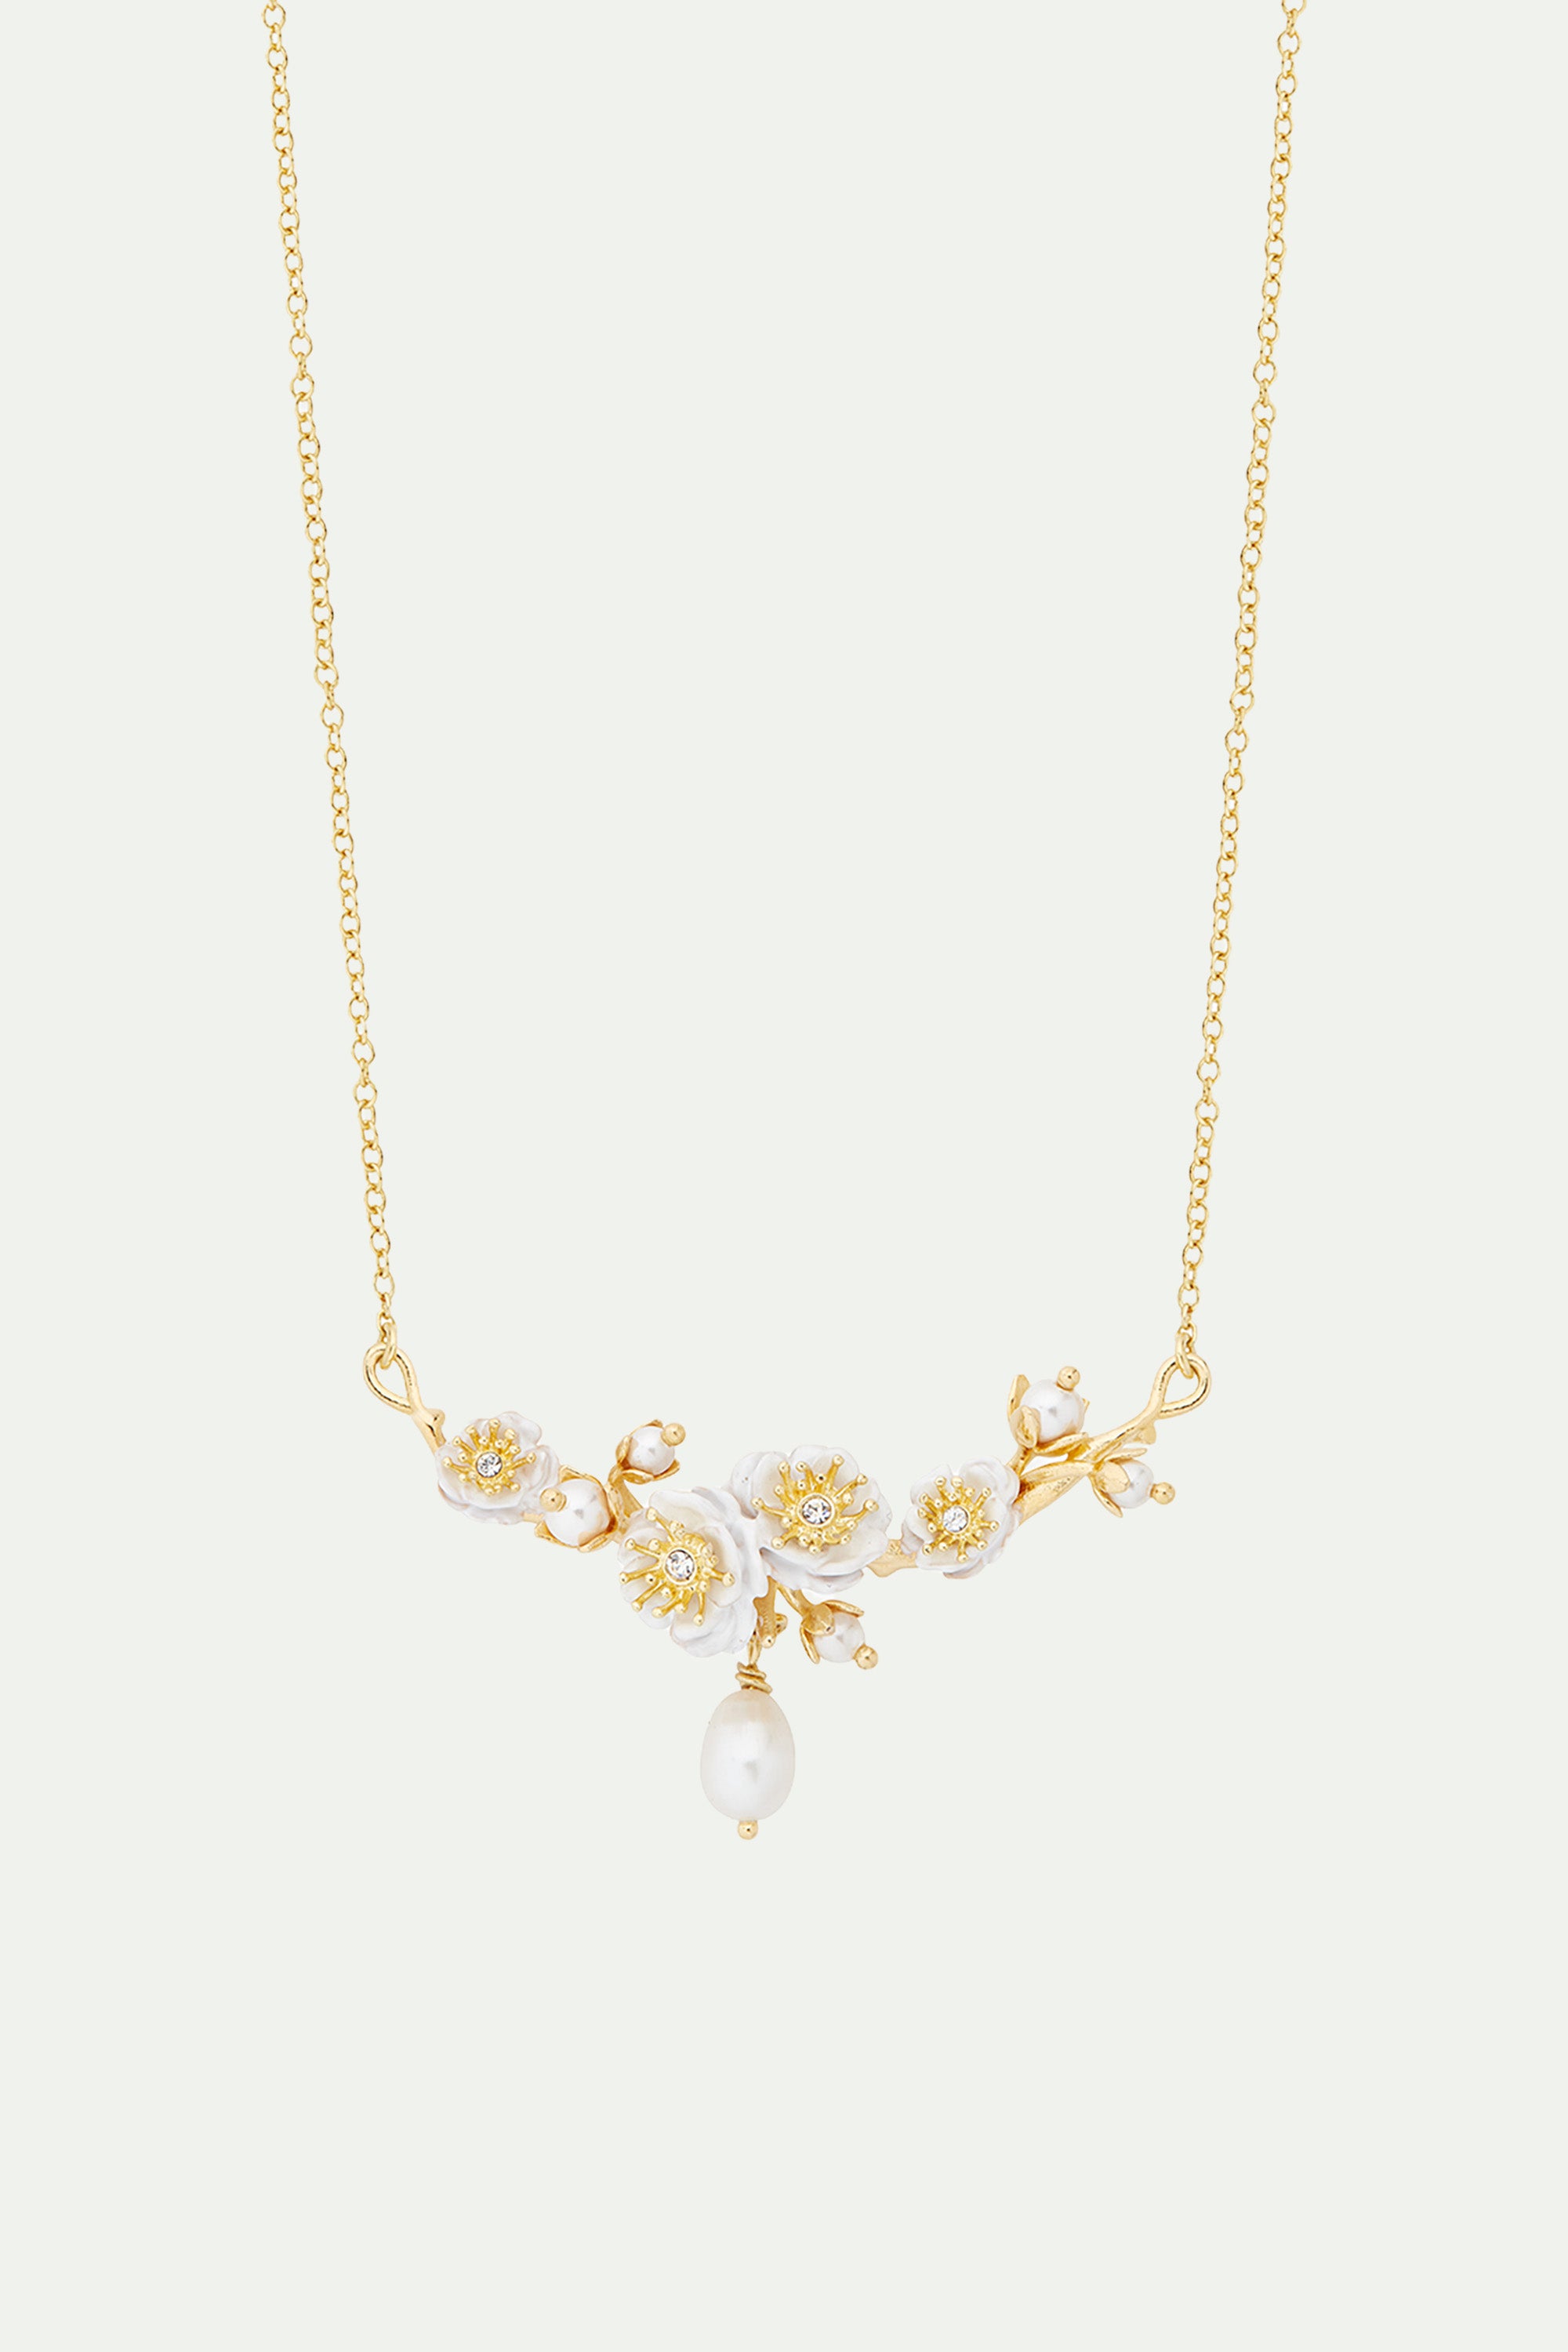 White rose brand and pearls statement necklace